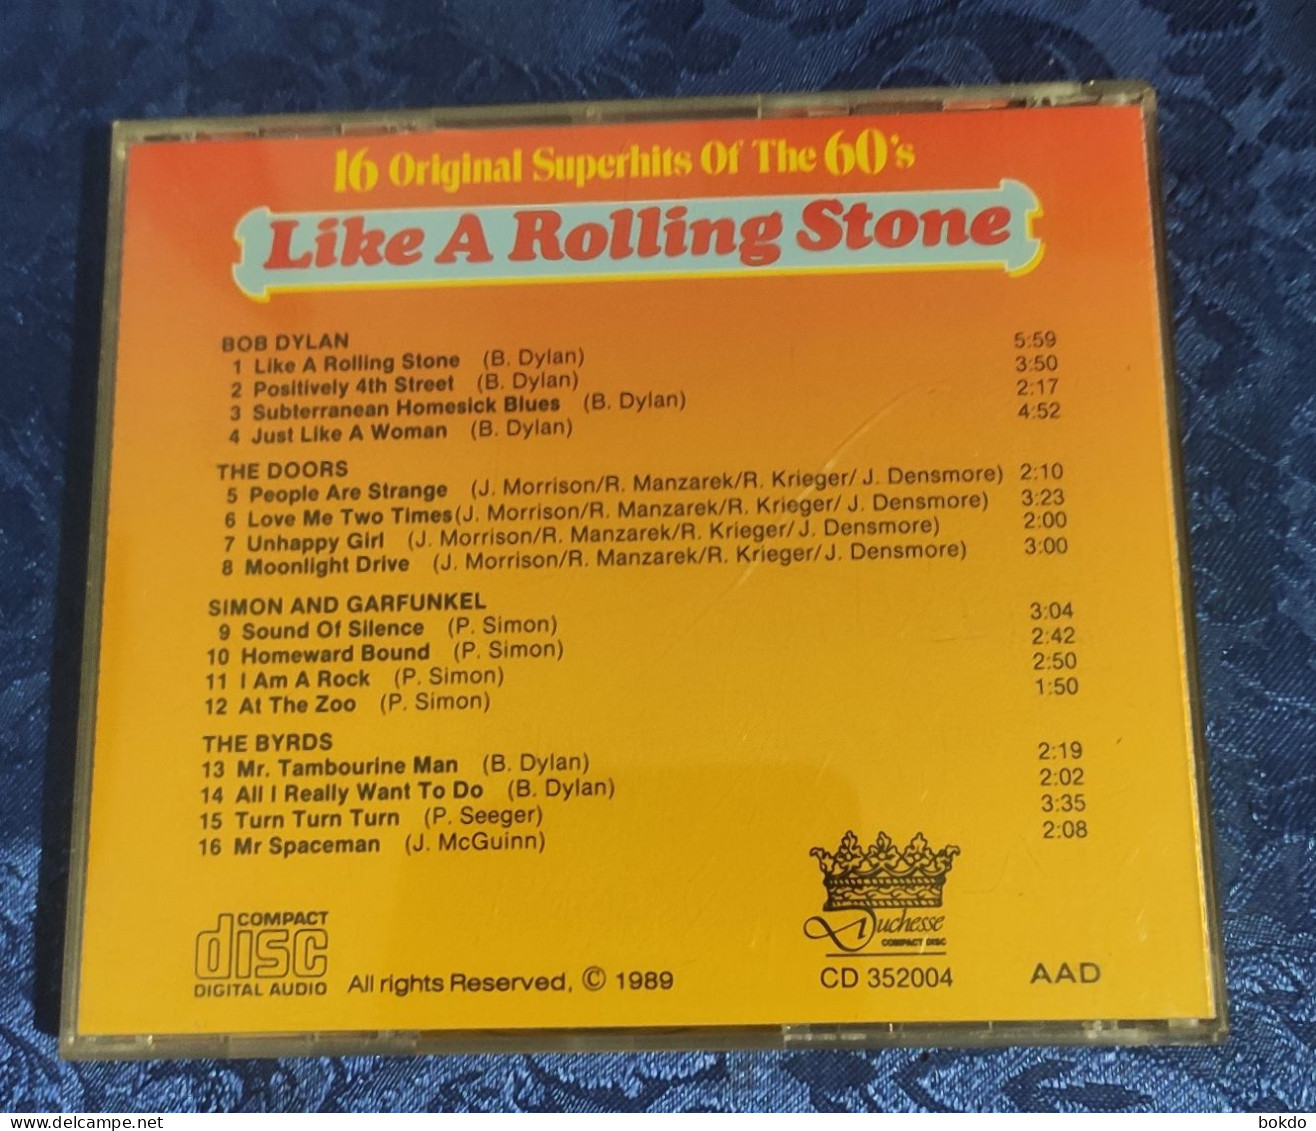 16 Original Superhits Of The 60'S - Like A Rolling Stone - Other - English Music